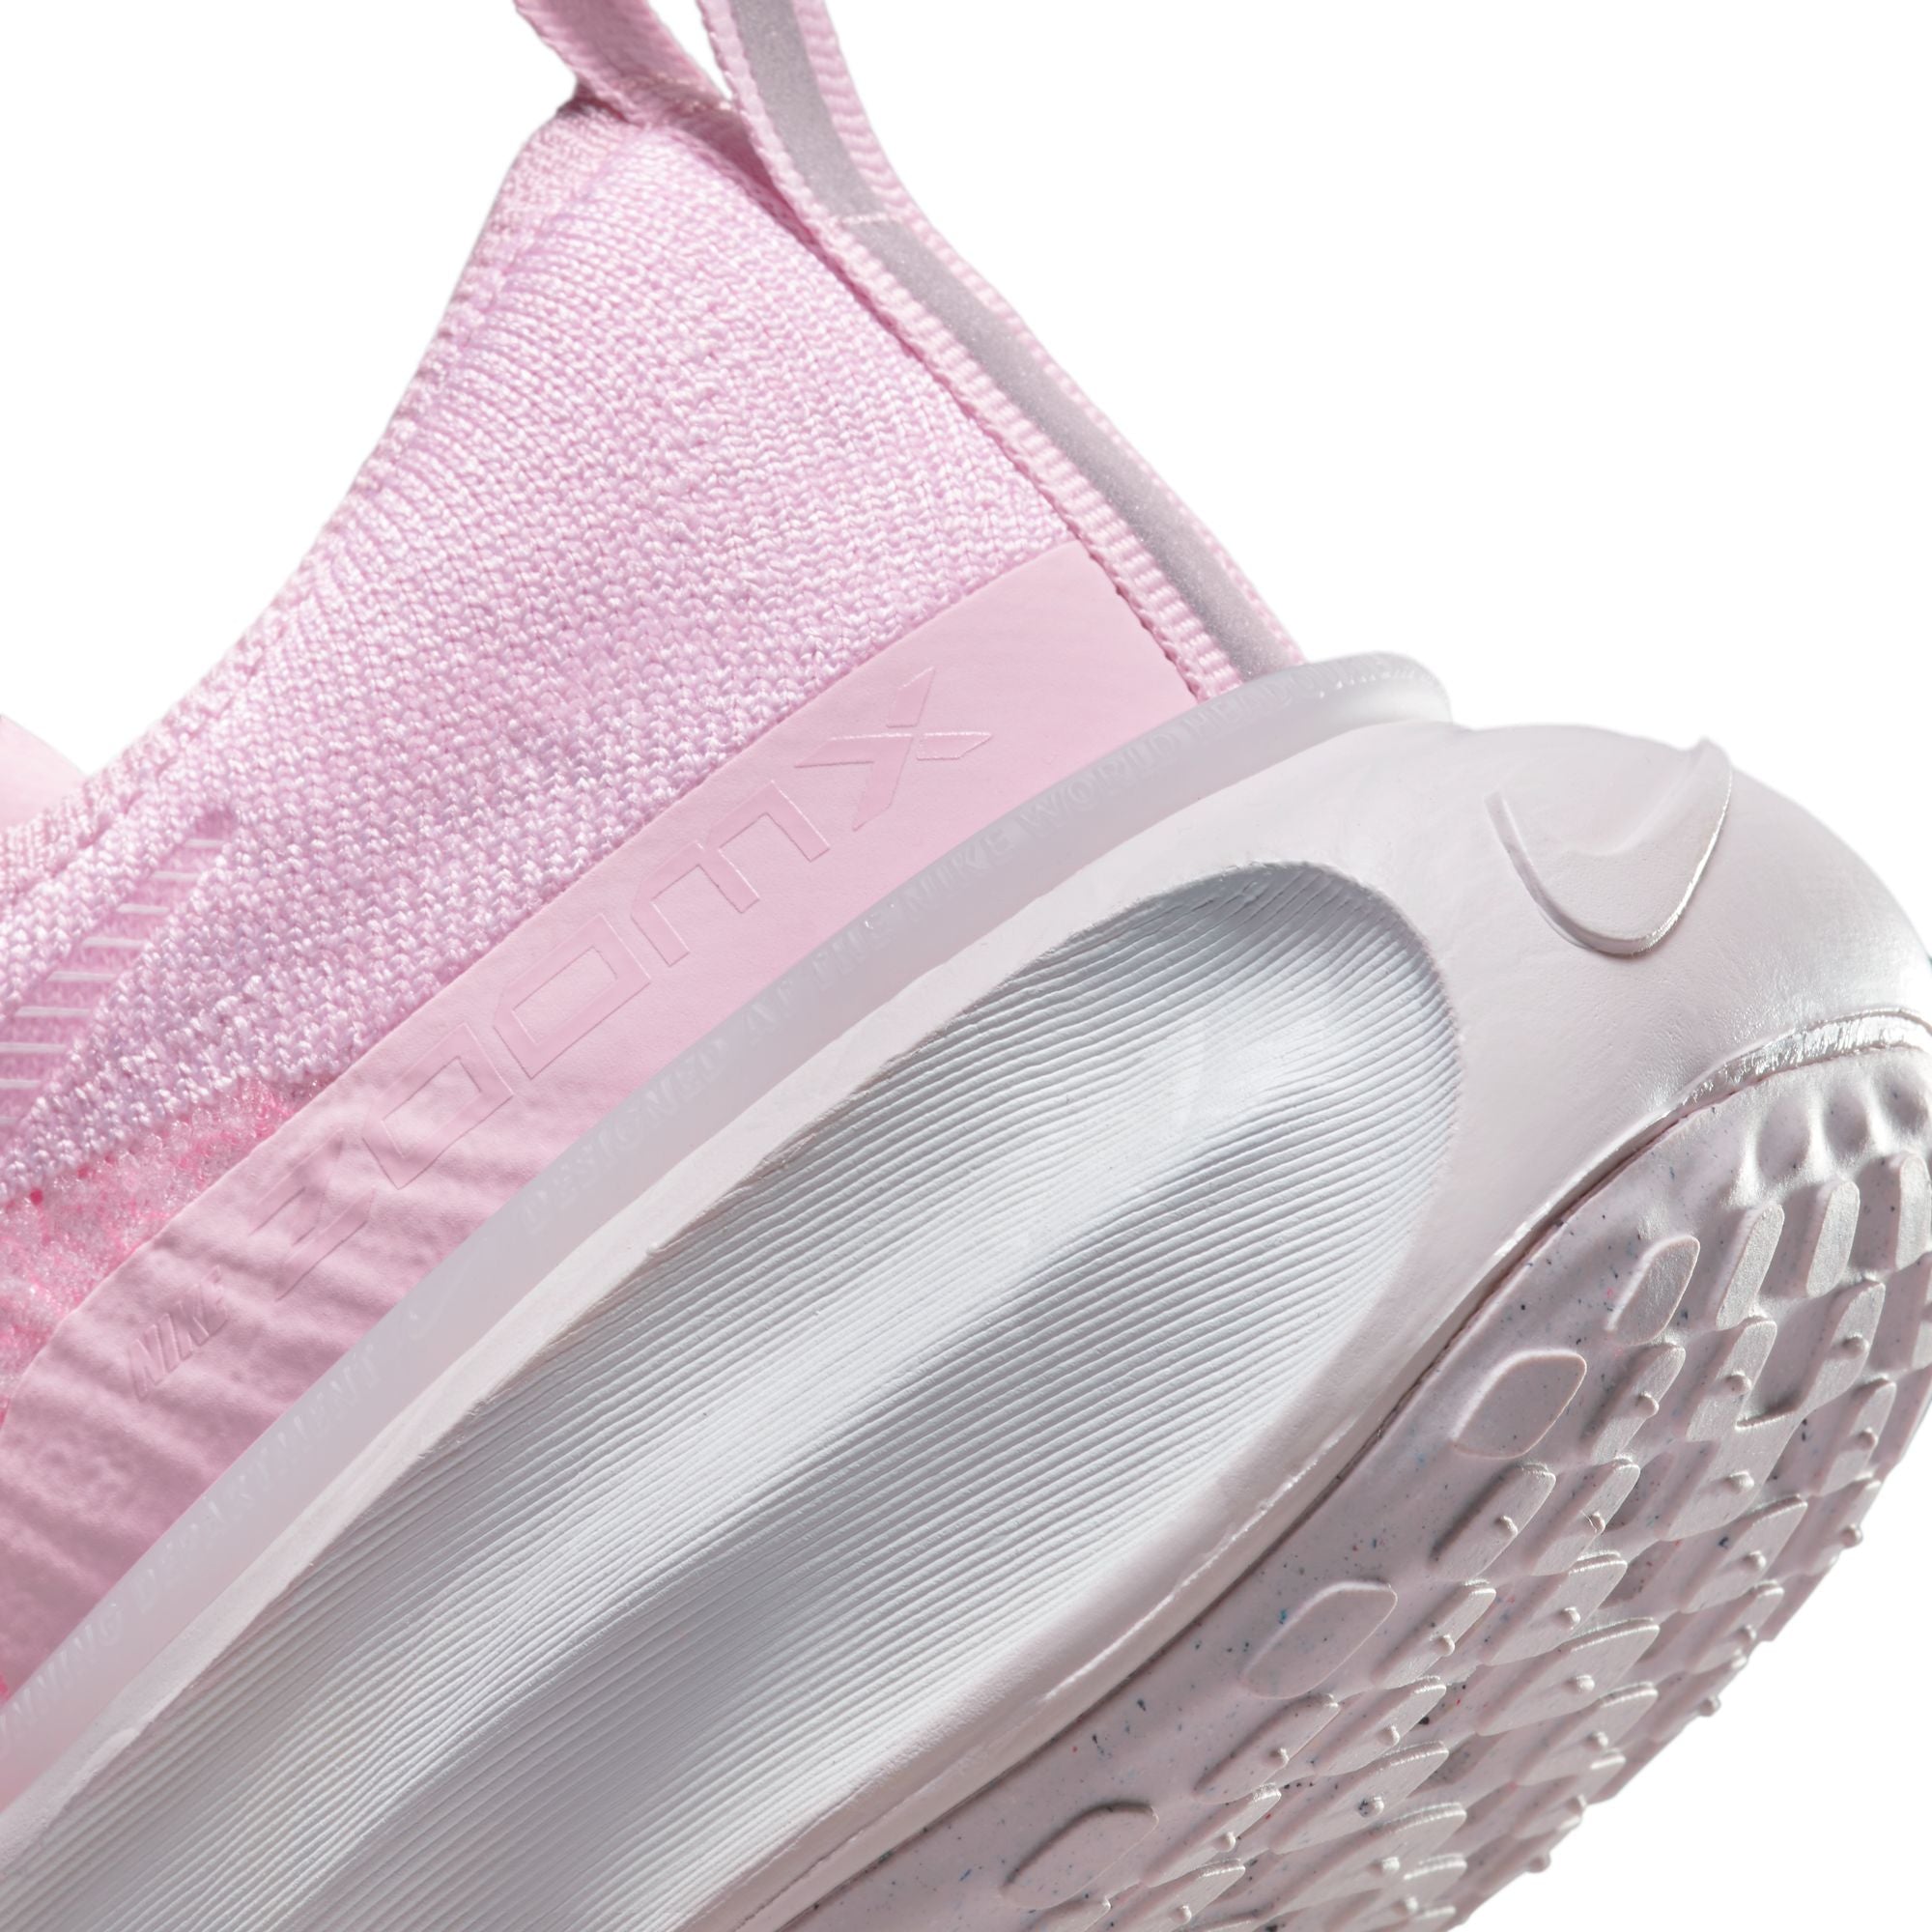 NIKE INVINCIBLE 3 WOMENS ROAD RUNNING SHOES PINK FOAM /WHITE-PEARL PINK ...